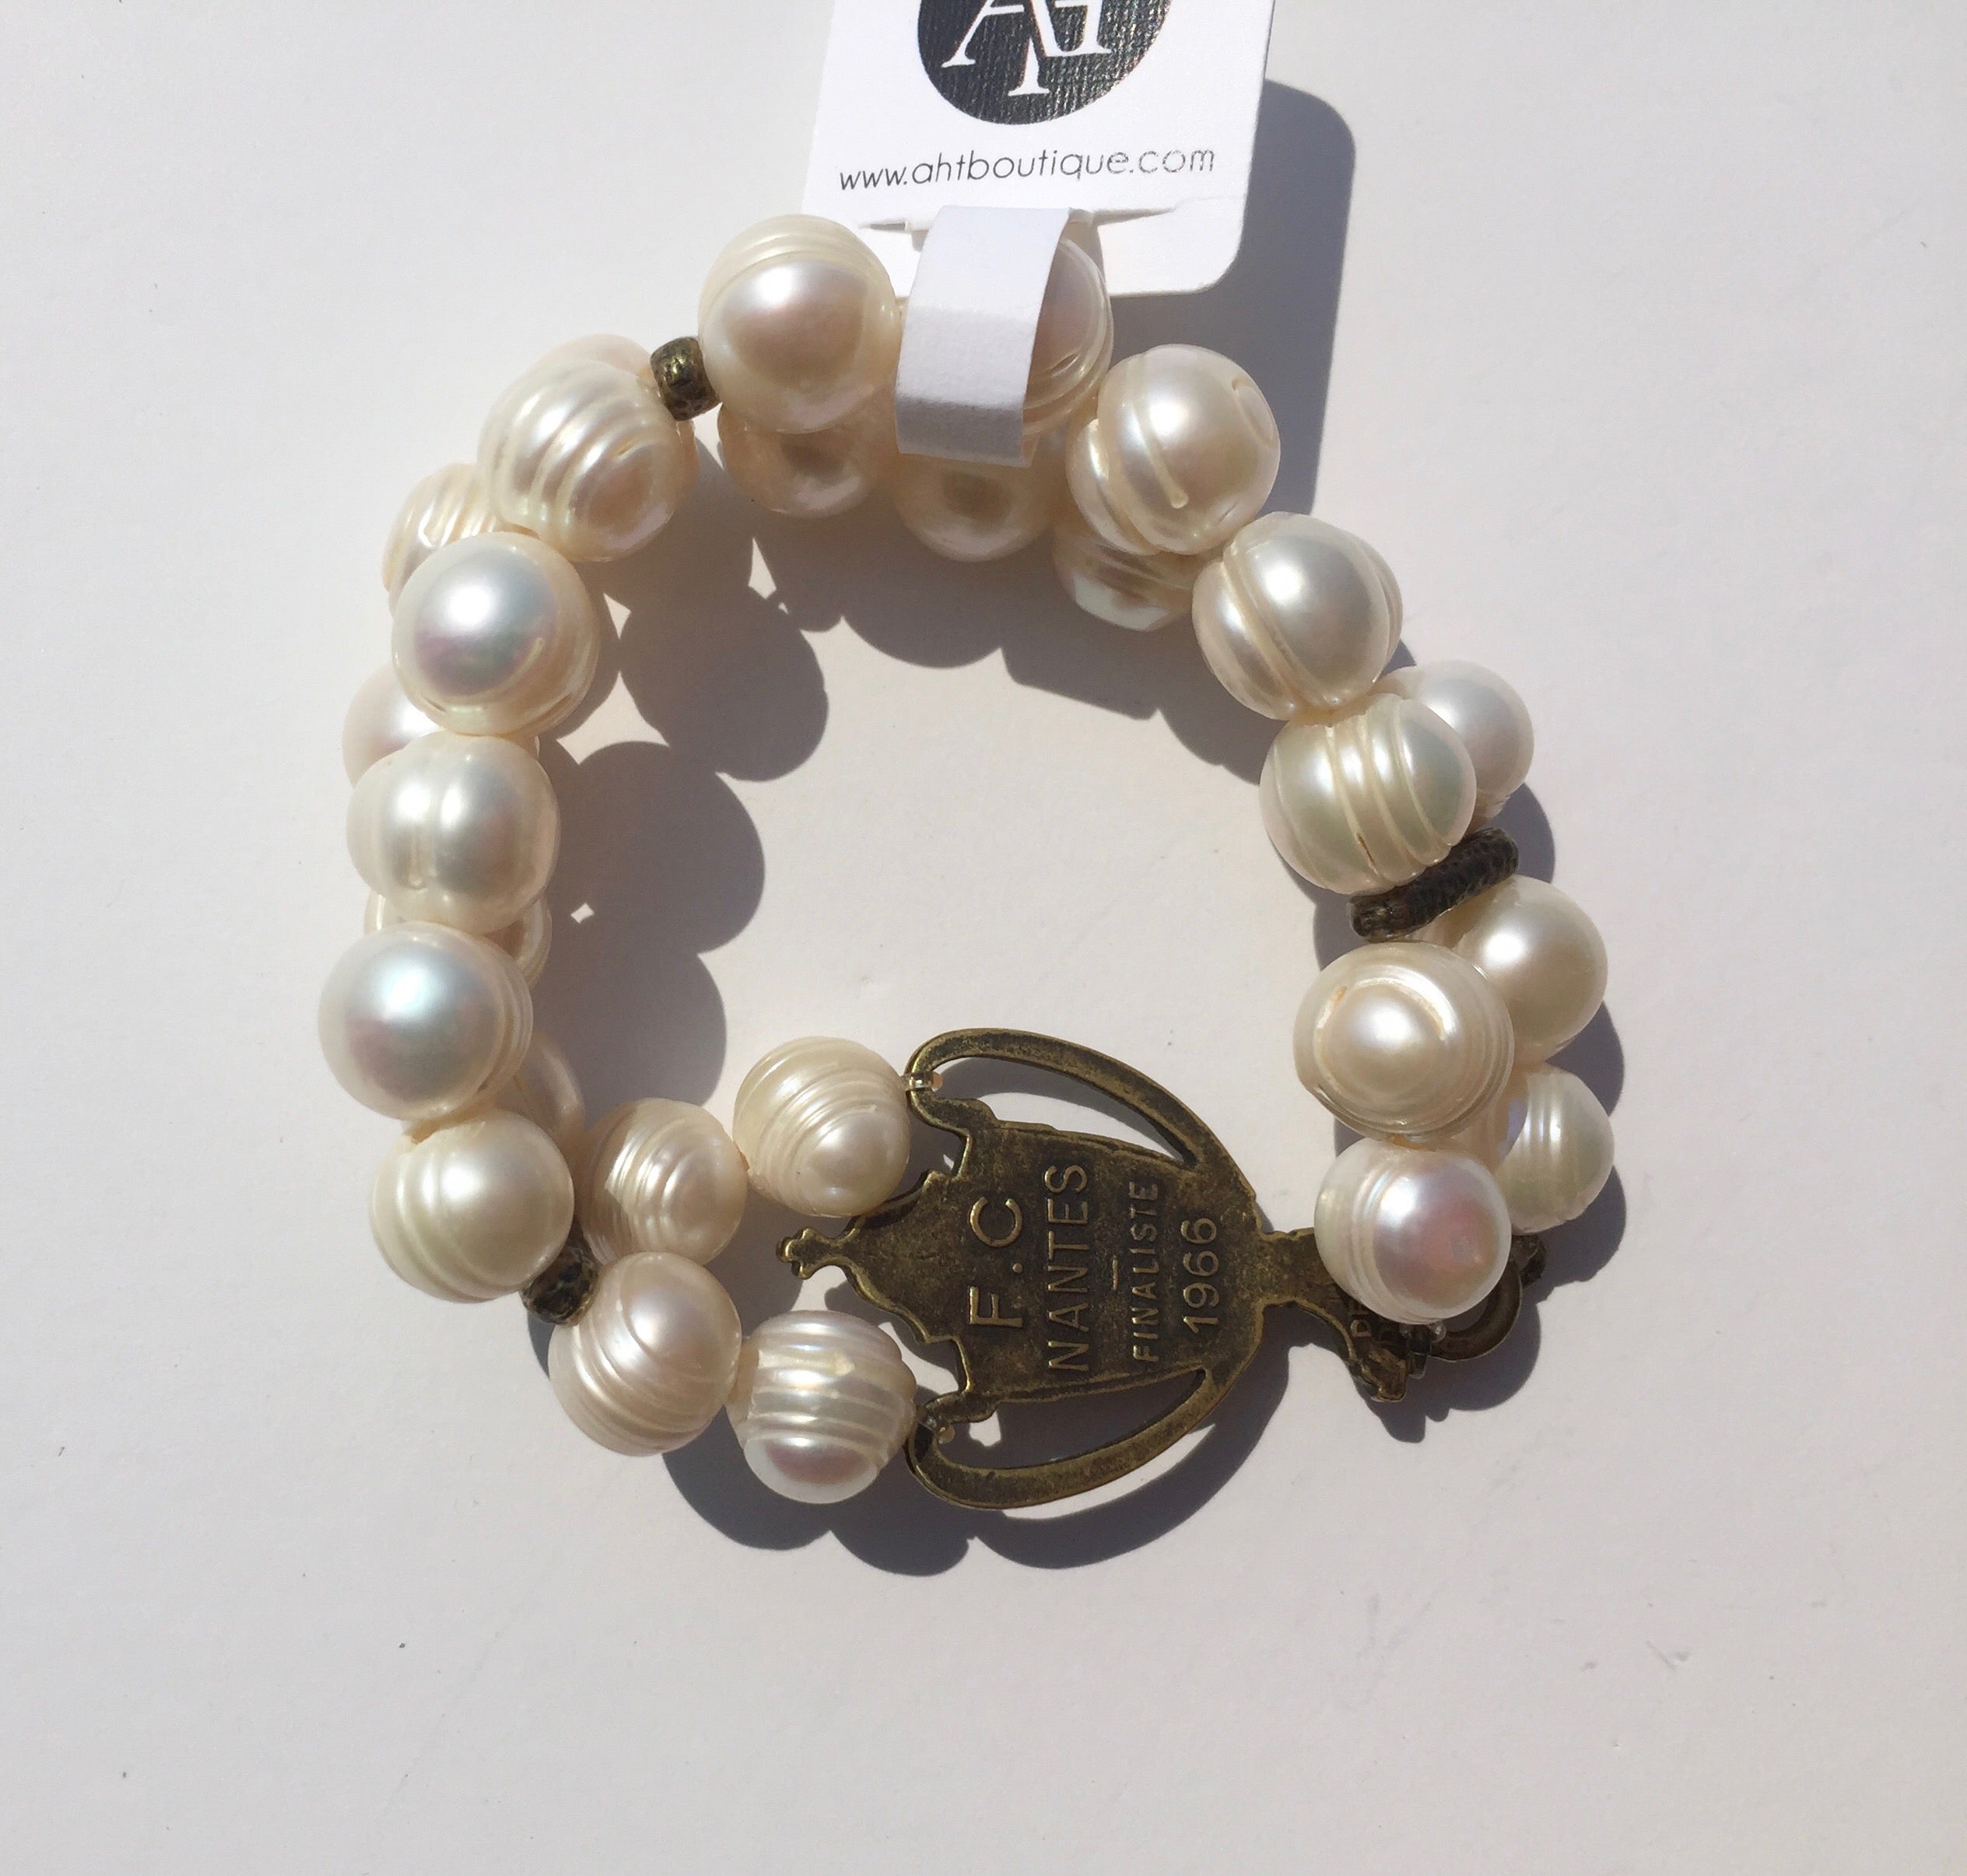 French Kande Bracelet White Beads with Trophy